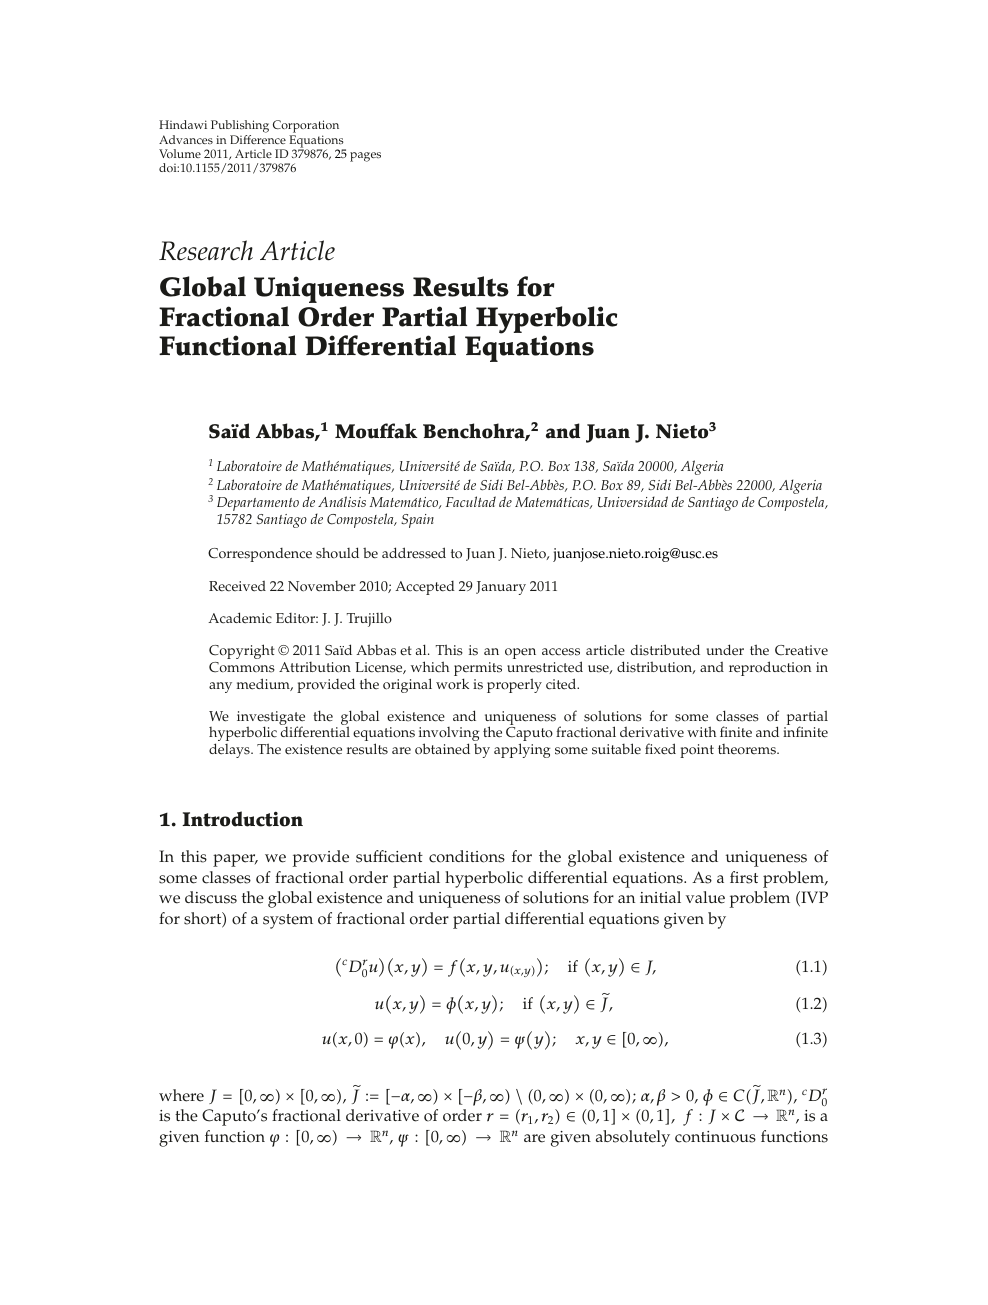 Global Uniqueness Results For Fractional Order Partial Hyperbolic Functional Differential Equations Topic Of Research Paper In Mathematics Download Scholarly Article Pdf And Read For Free On Cyberleninka Open Science Hub